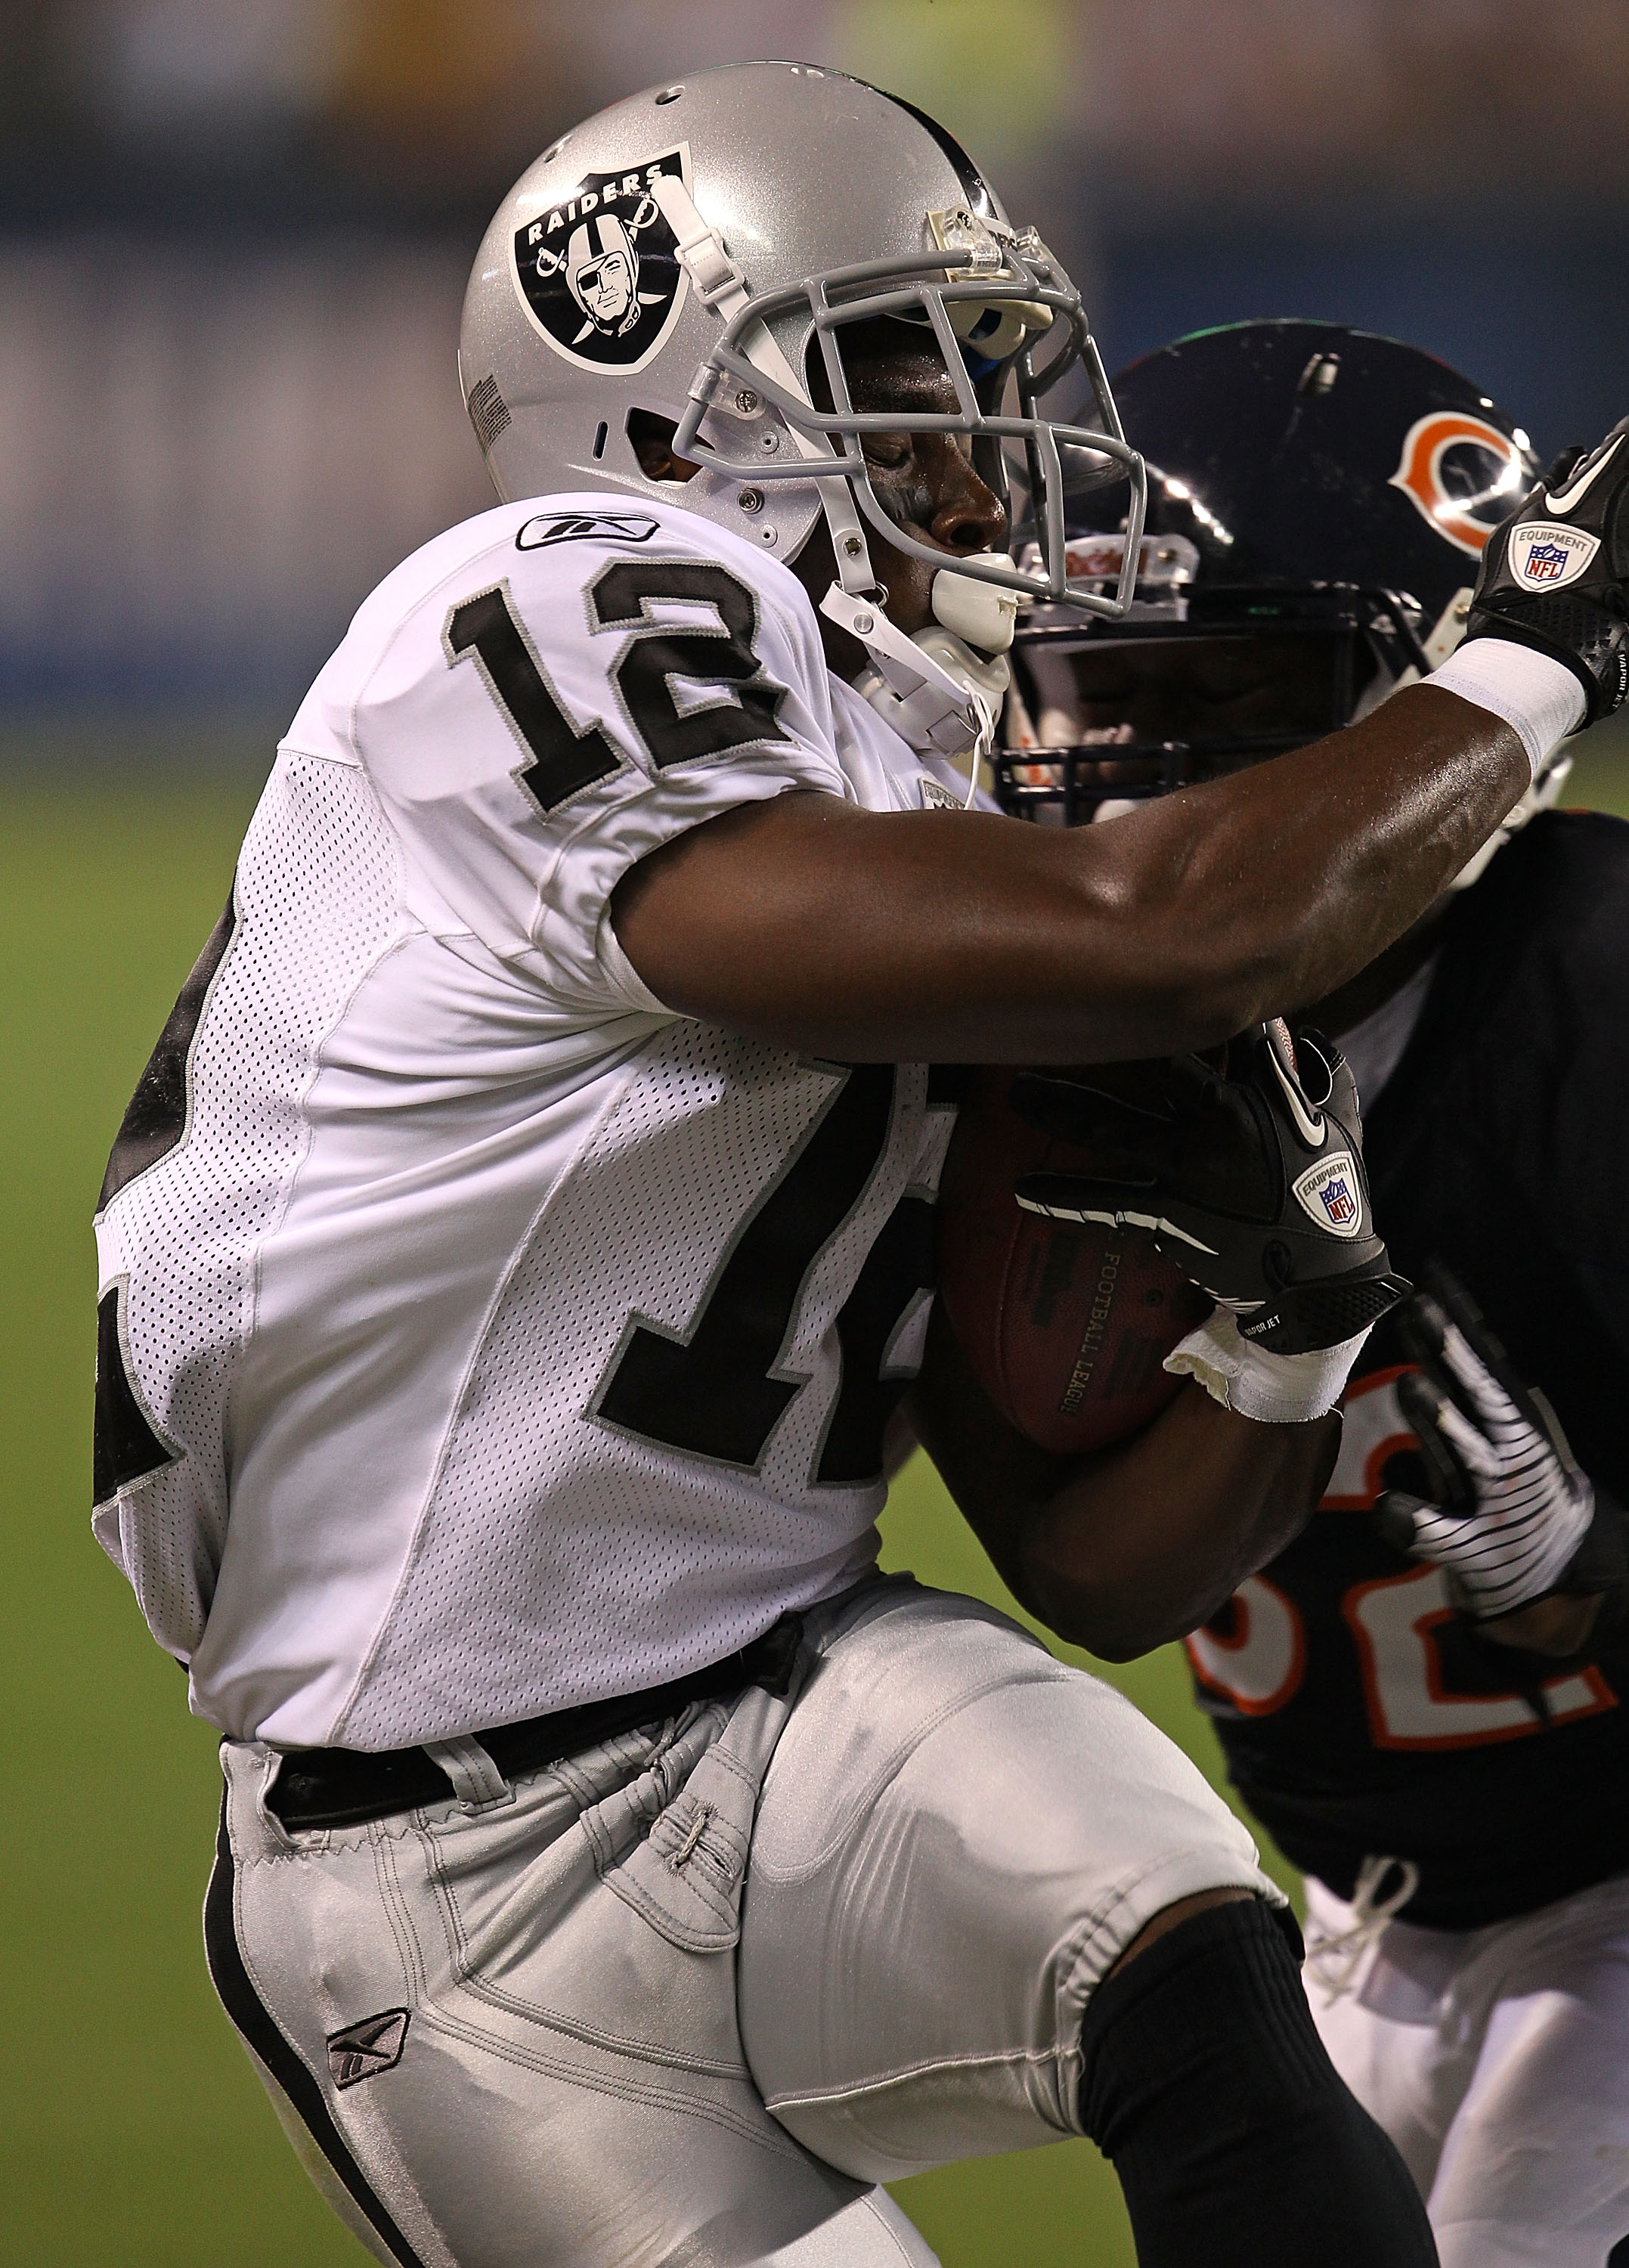 CHICAGO - AUGUST 21: Jacoby Ford #12 of the Oakland Raiders is hit by Kevin Malast #52 of the Chicago Bears during a preseason game at Soldier Field on August 21, 2010 in Chicago, Illinois. The Raiders defeated the Bears 32-17. (Photo by Jonathan Daniel/G